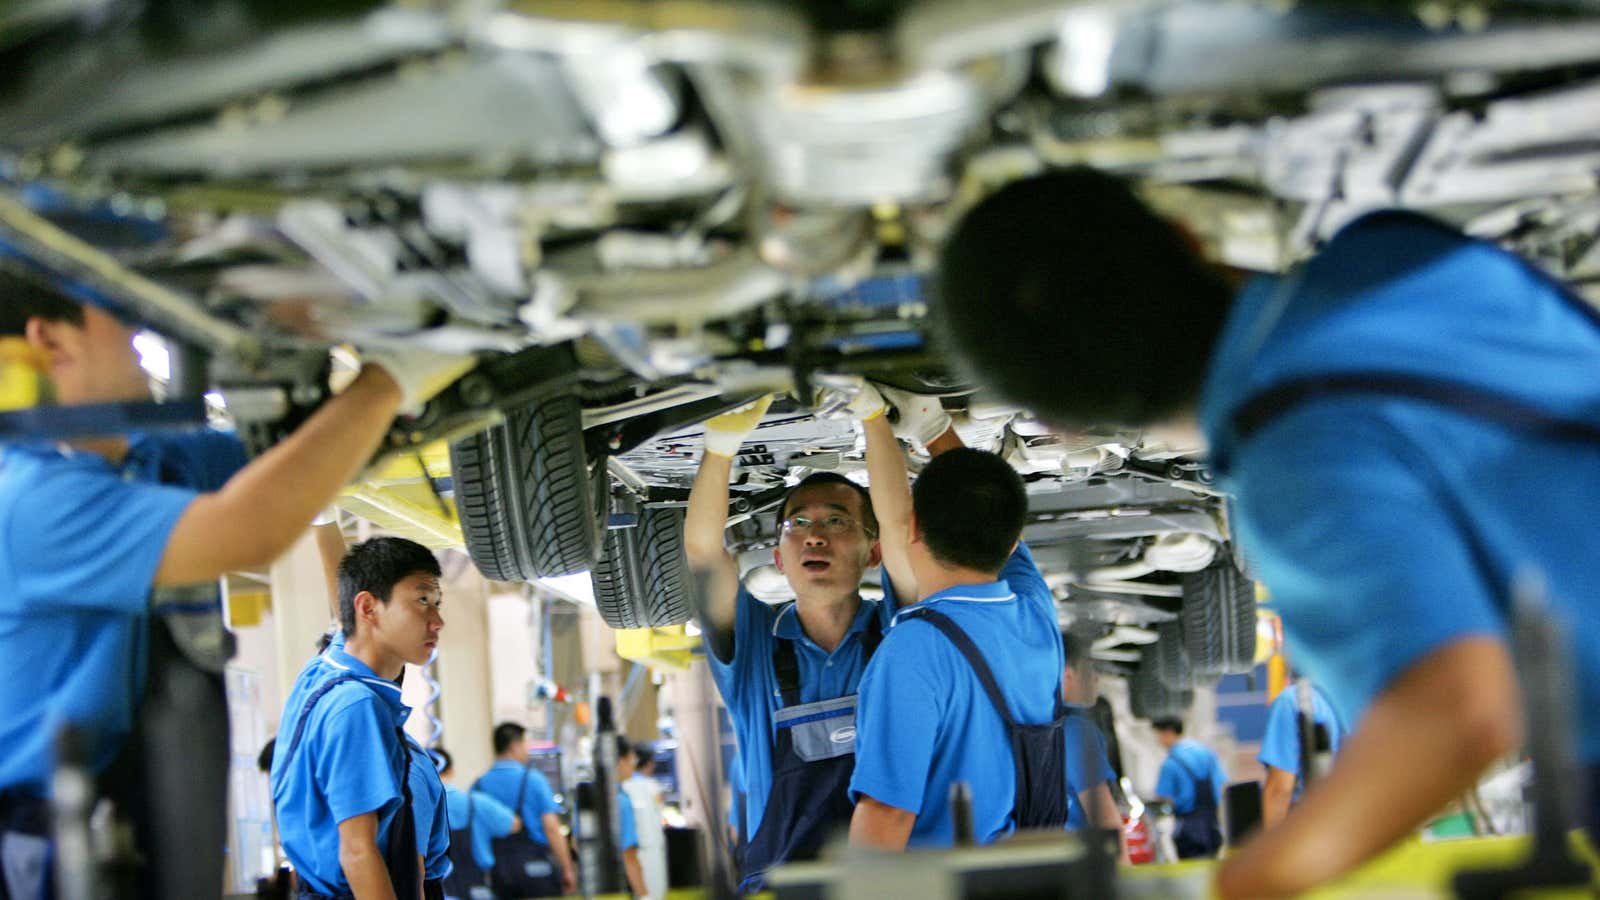 Don’t get Mitt Romney started on US automakers running factories like this one in China. Seriously, don’t.